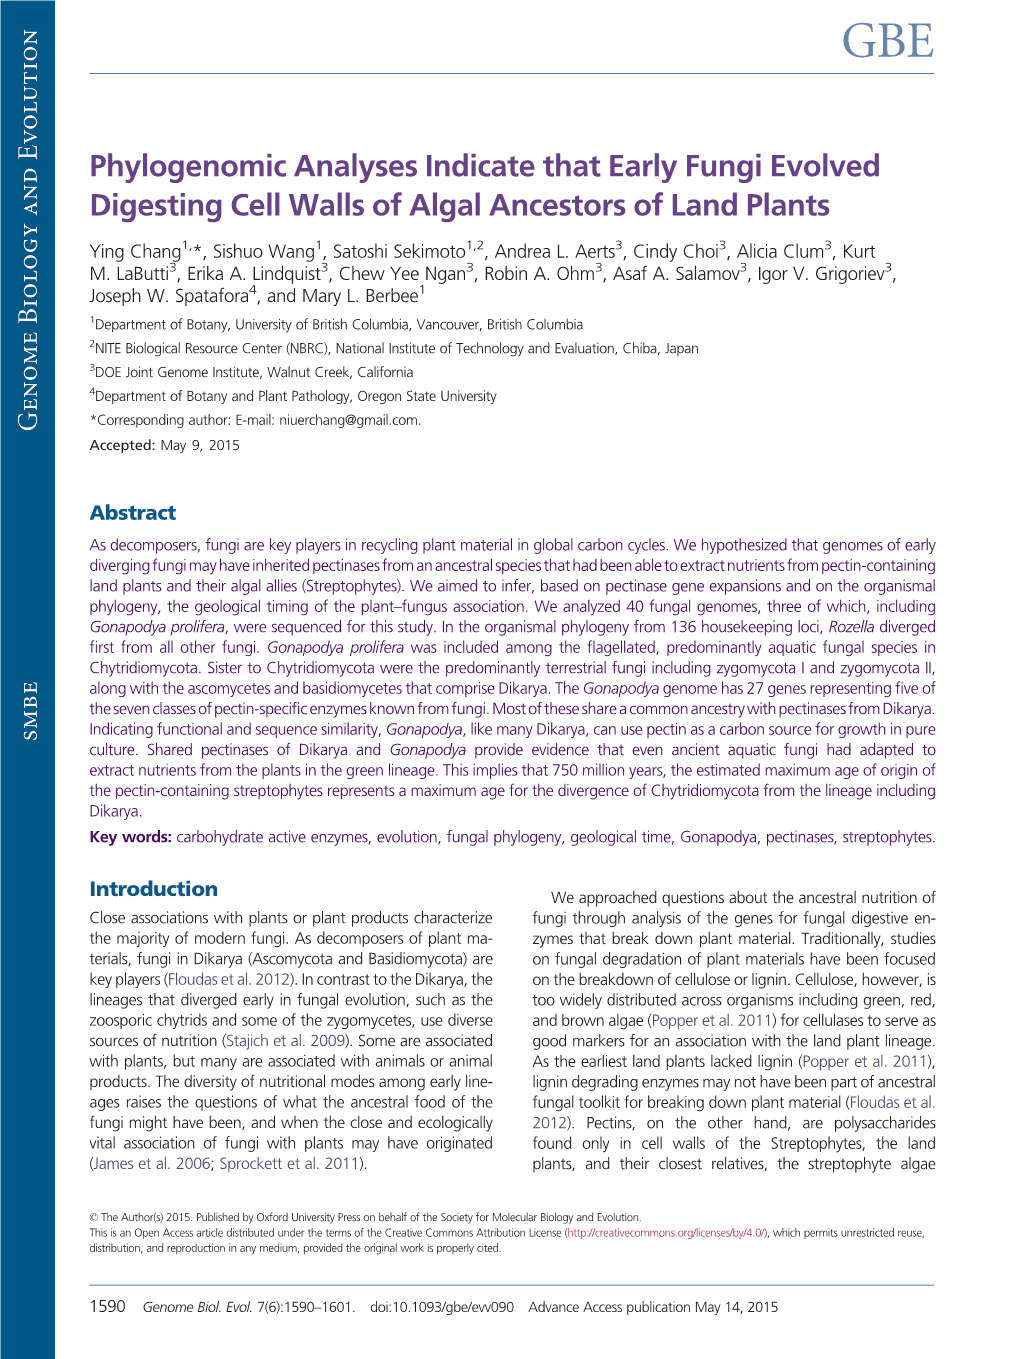 Phylogenomic Analyses Indicate That Early Fungi Evolved Digesting Cell Walls of Algal Ancestors of Land Plants